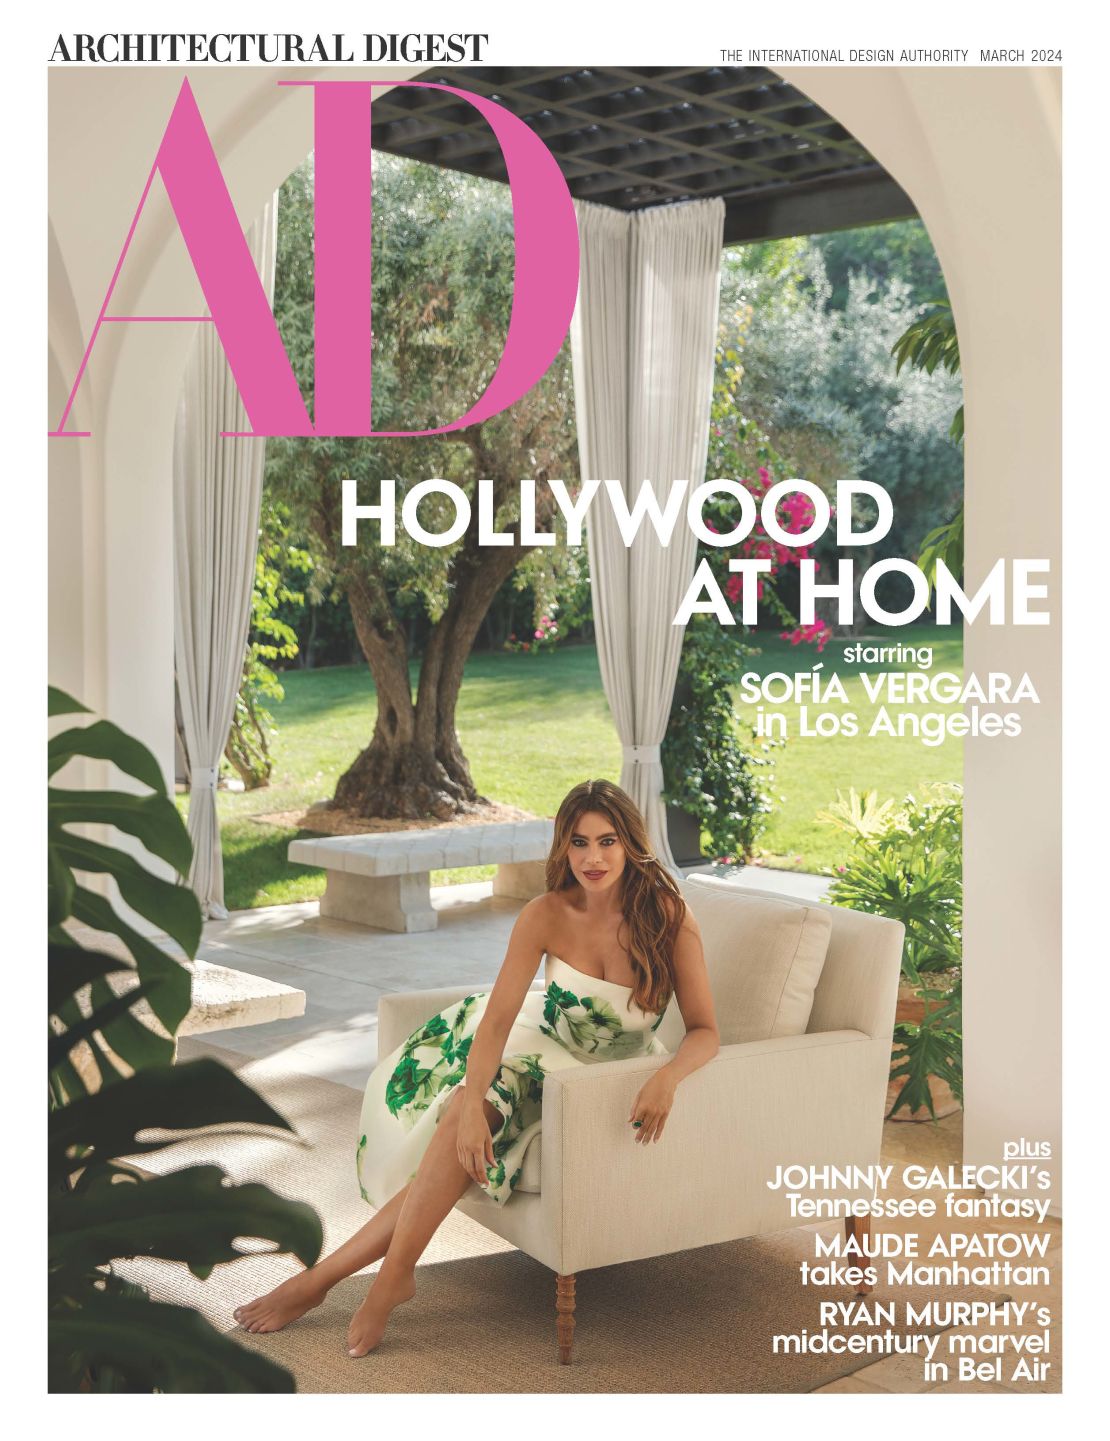 Sofía Vergara is the March cover star of Architectural Digest's "Hollywood at Home" issue.